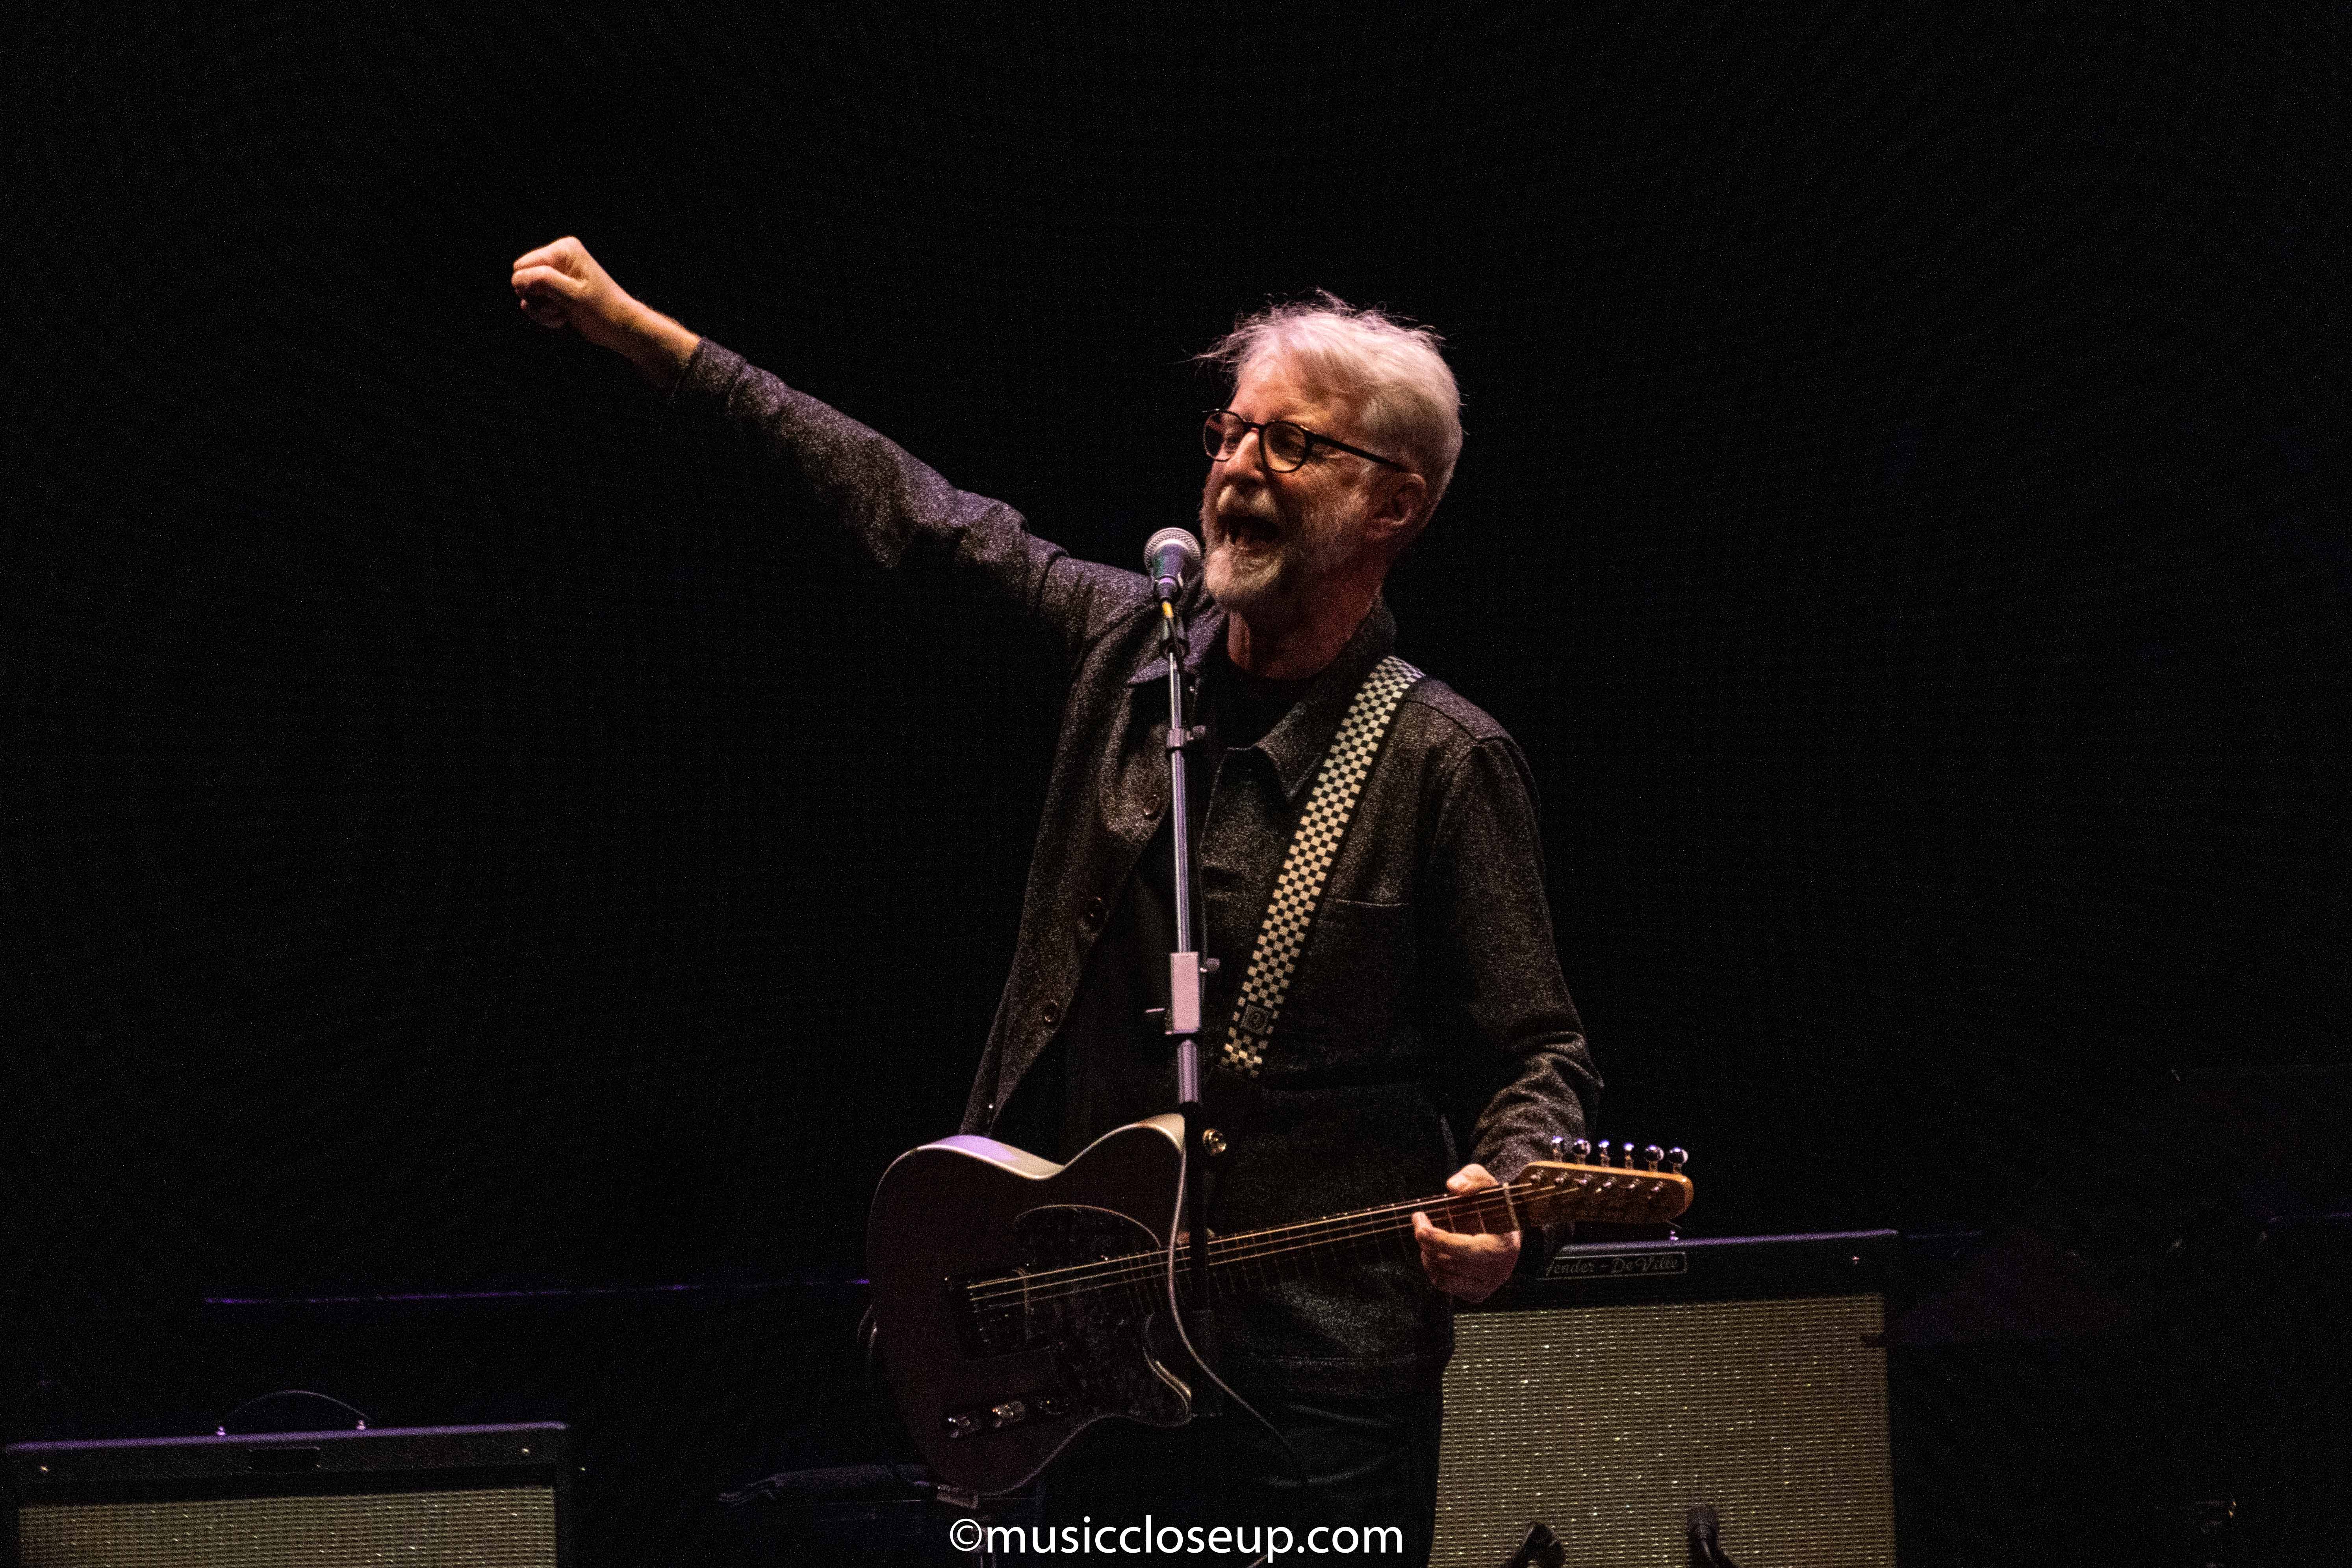 Billy Bragg holding his fist in the air